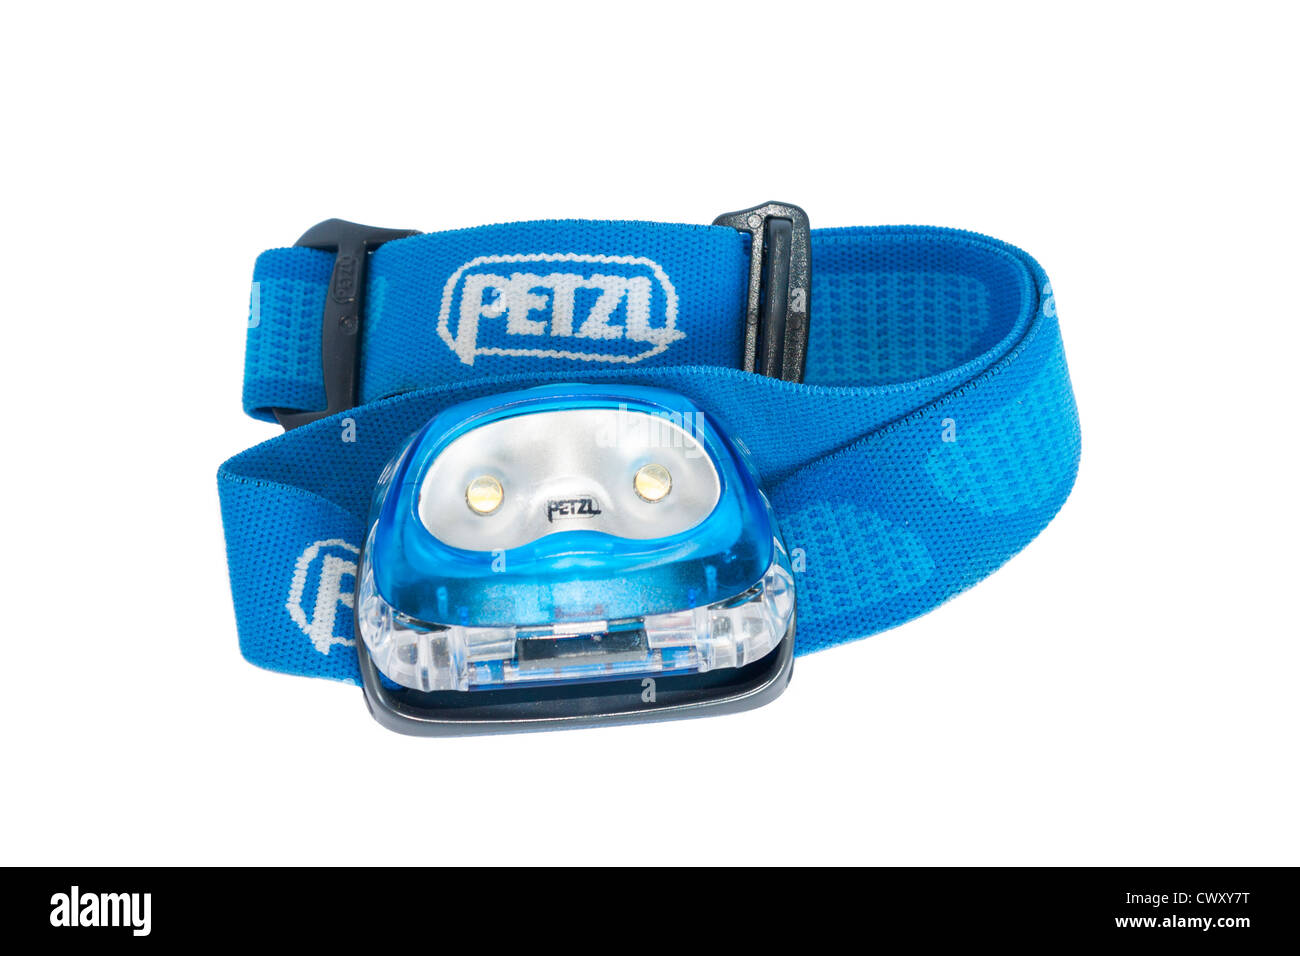 A Petzl head lamp on a white background. Stock Photo